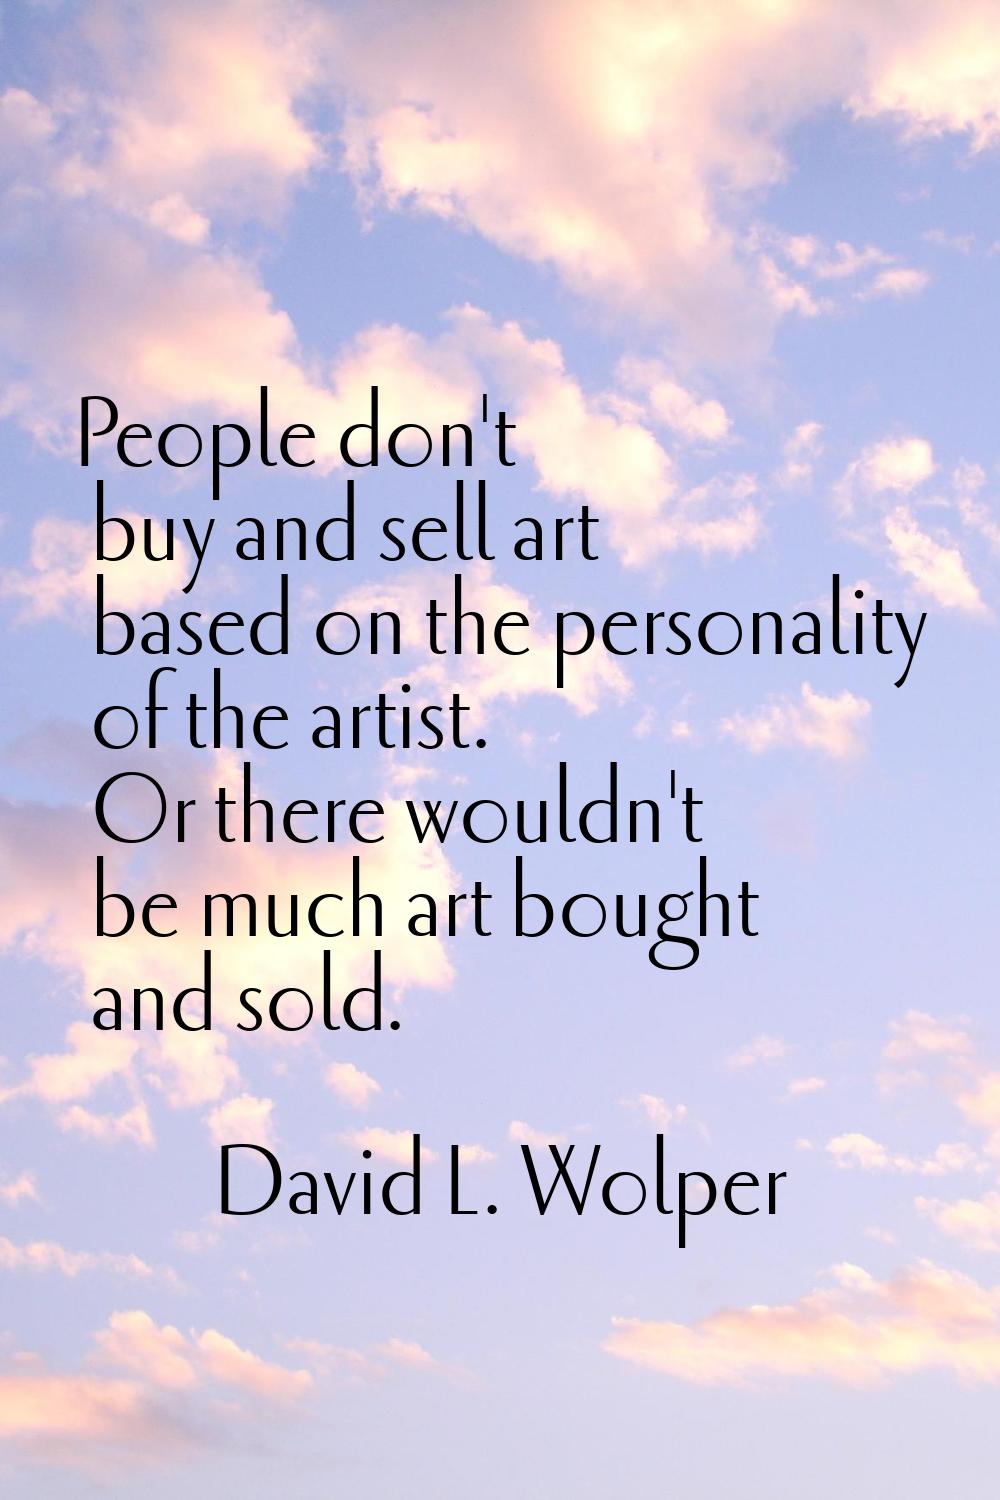 People don't buy and sell art based on the personality of the artist. Or there wouldn't be much art